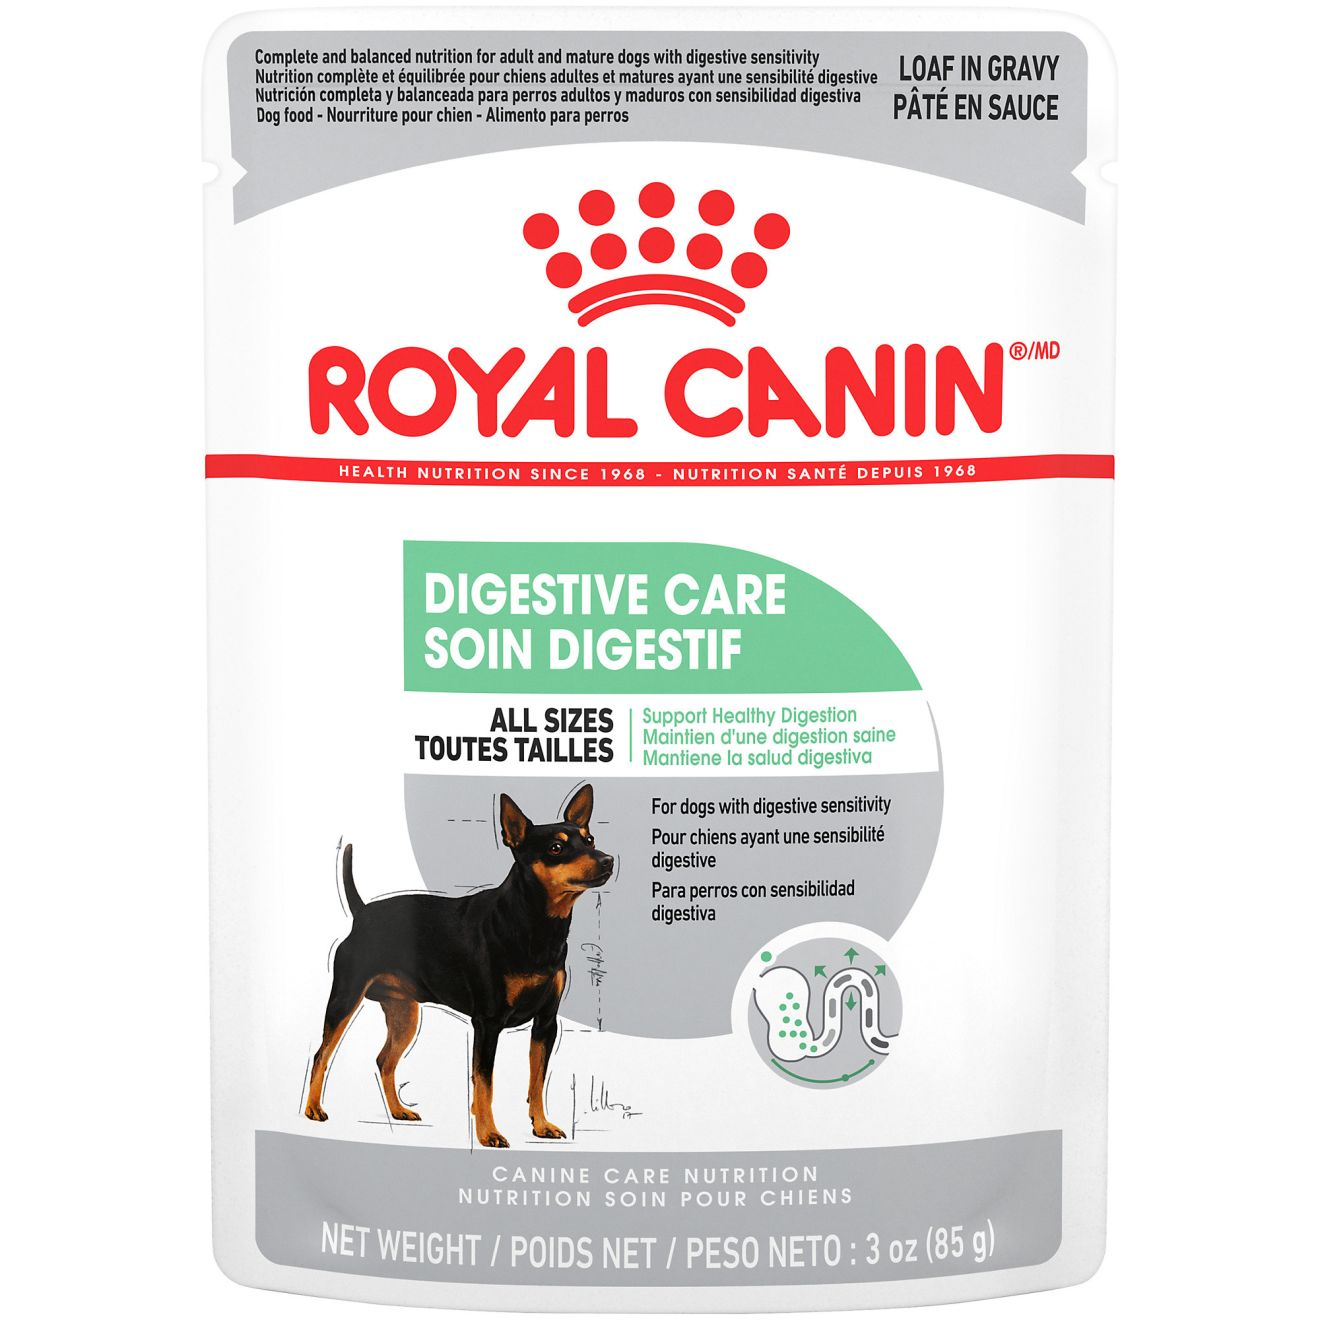 Digestive Care Pouch Dog Food